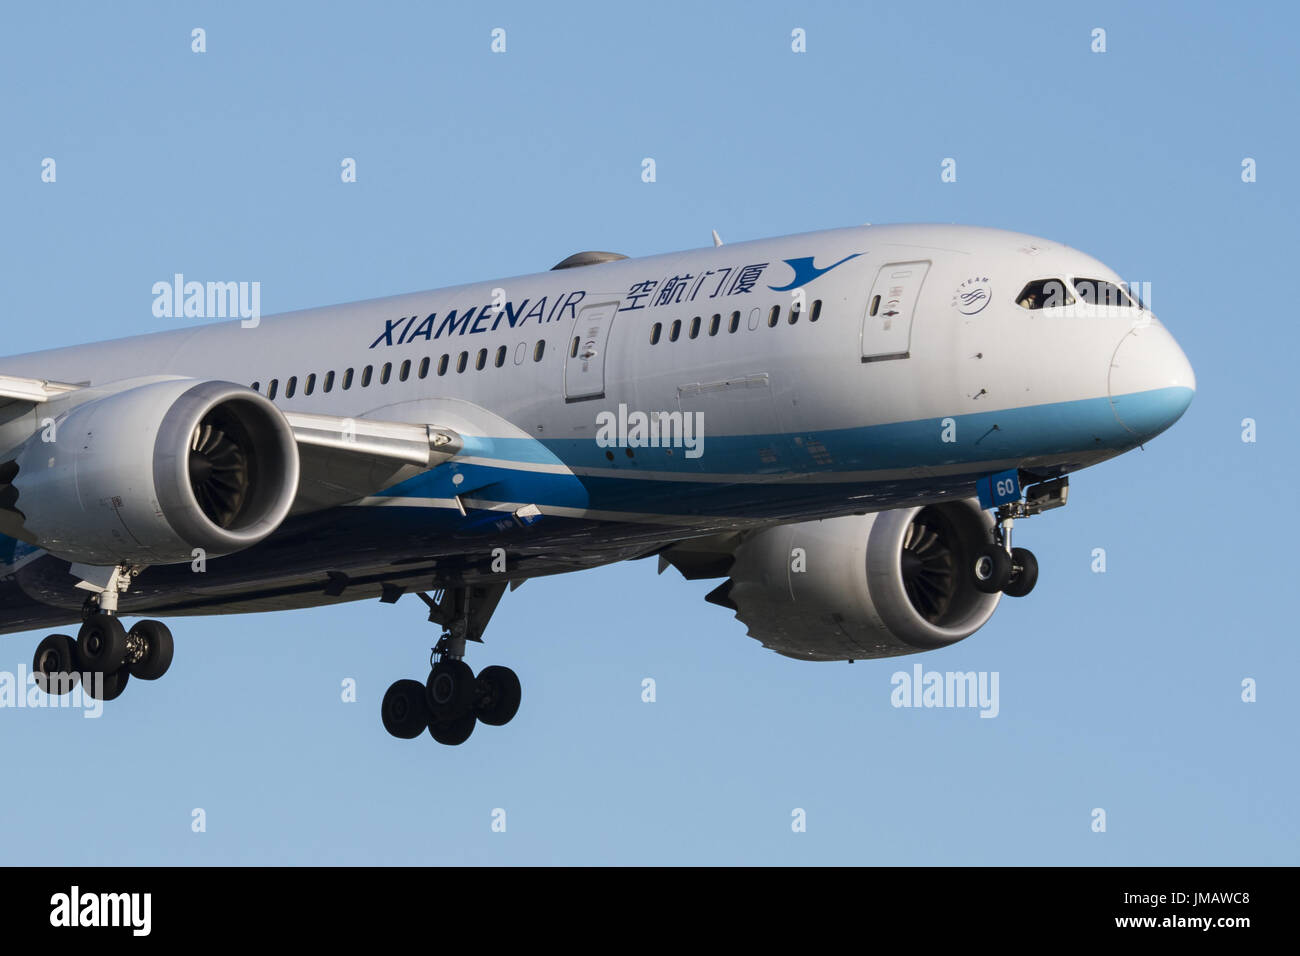 Richmond, British Columbia, Canada. 3rd July, 2017. A XiamenAir Boeing 787 (787-8) Dreamliner jet airliner on final approach for landing at Vancouver International Airport. Credit: Bayne Stanley/ZUMA Wire/Alamy Live News Stock Photo